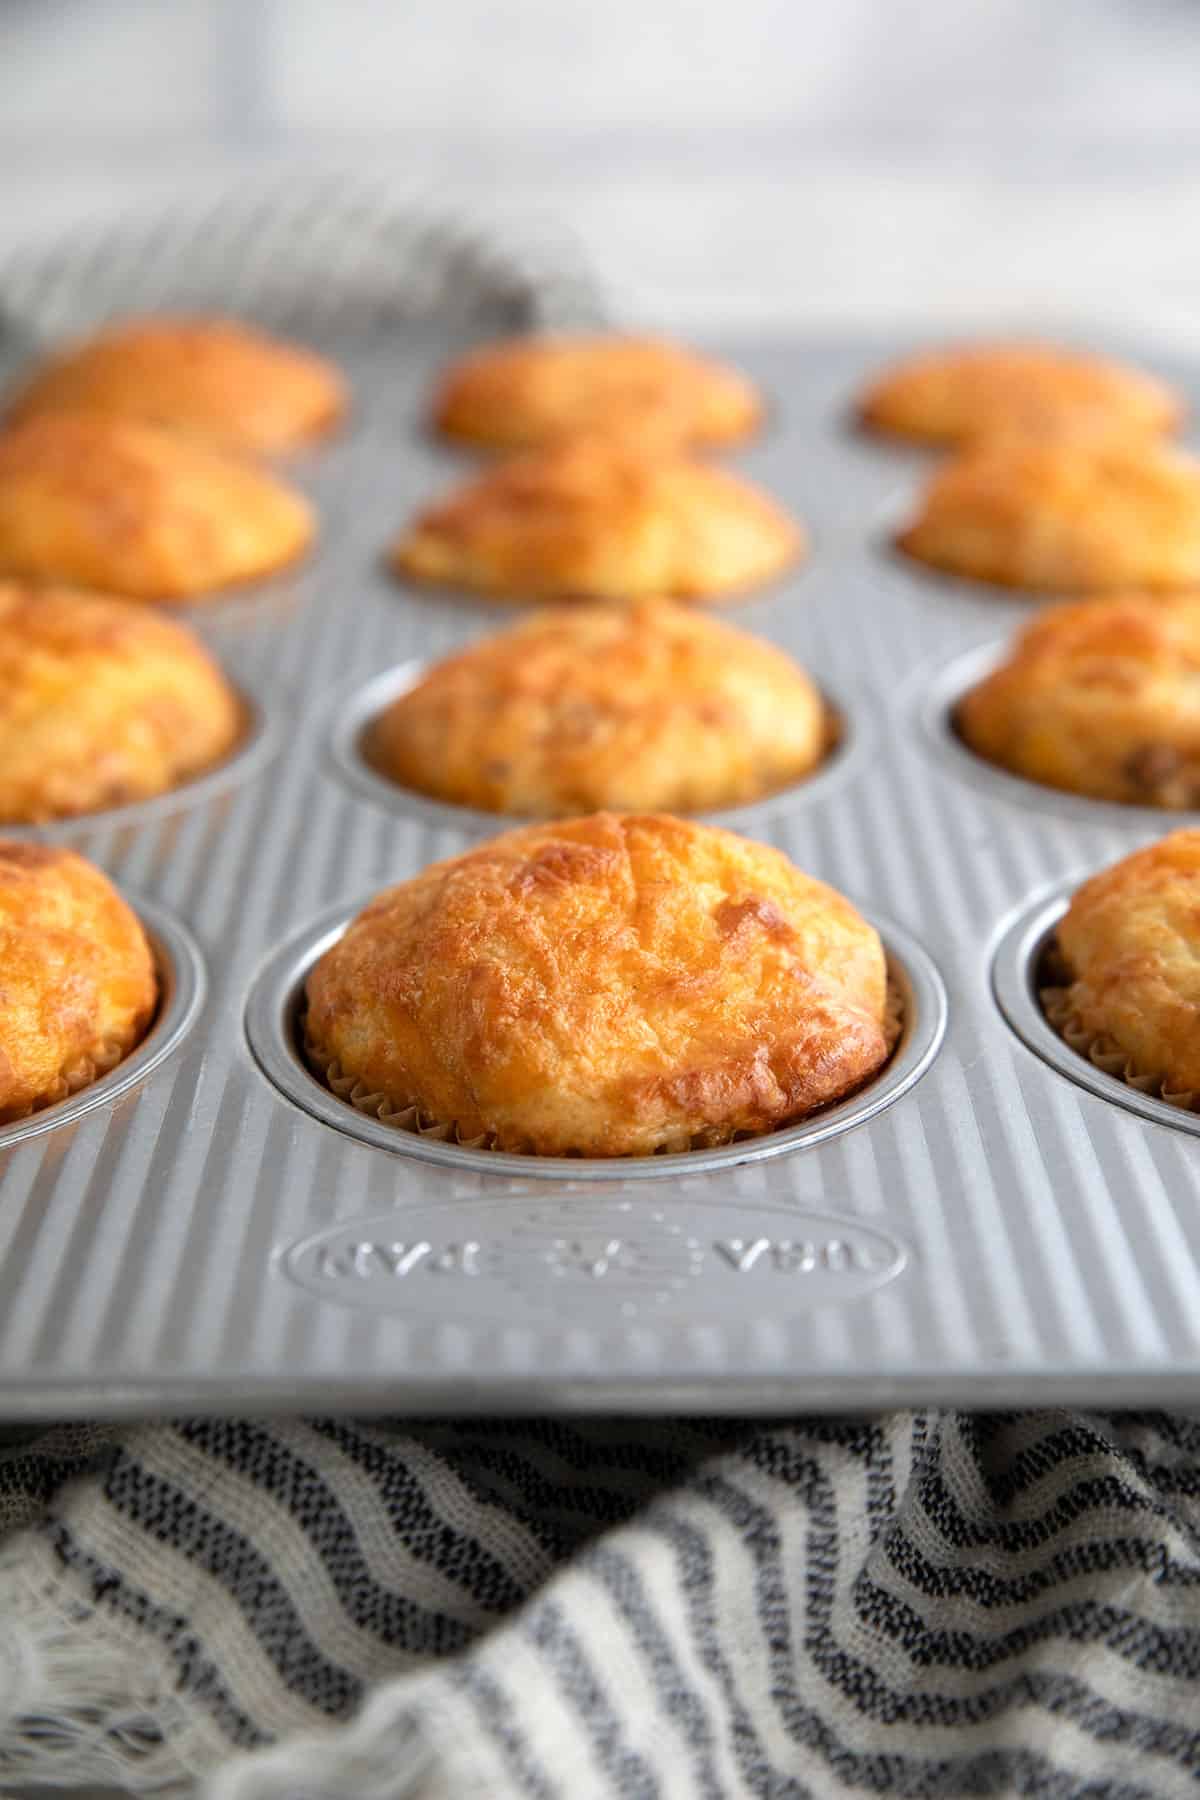 Freshly baked cottage cheese muffins in a metal baking pan over a striped kitchen towel.